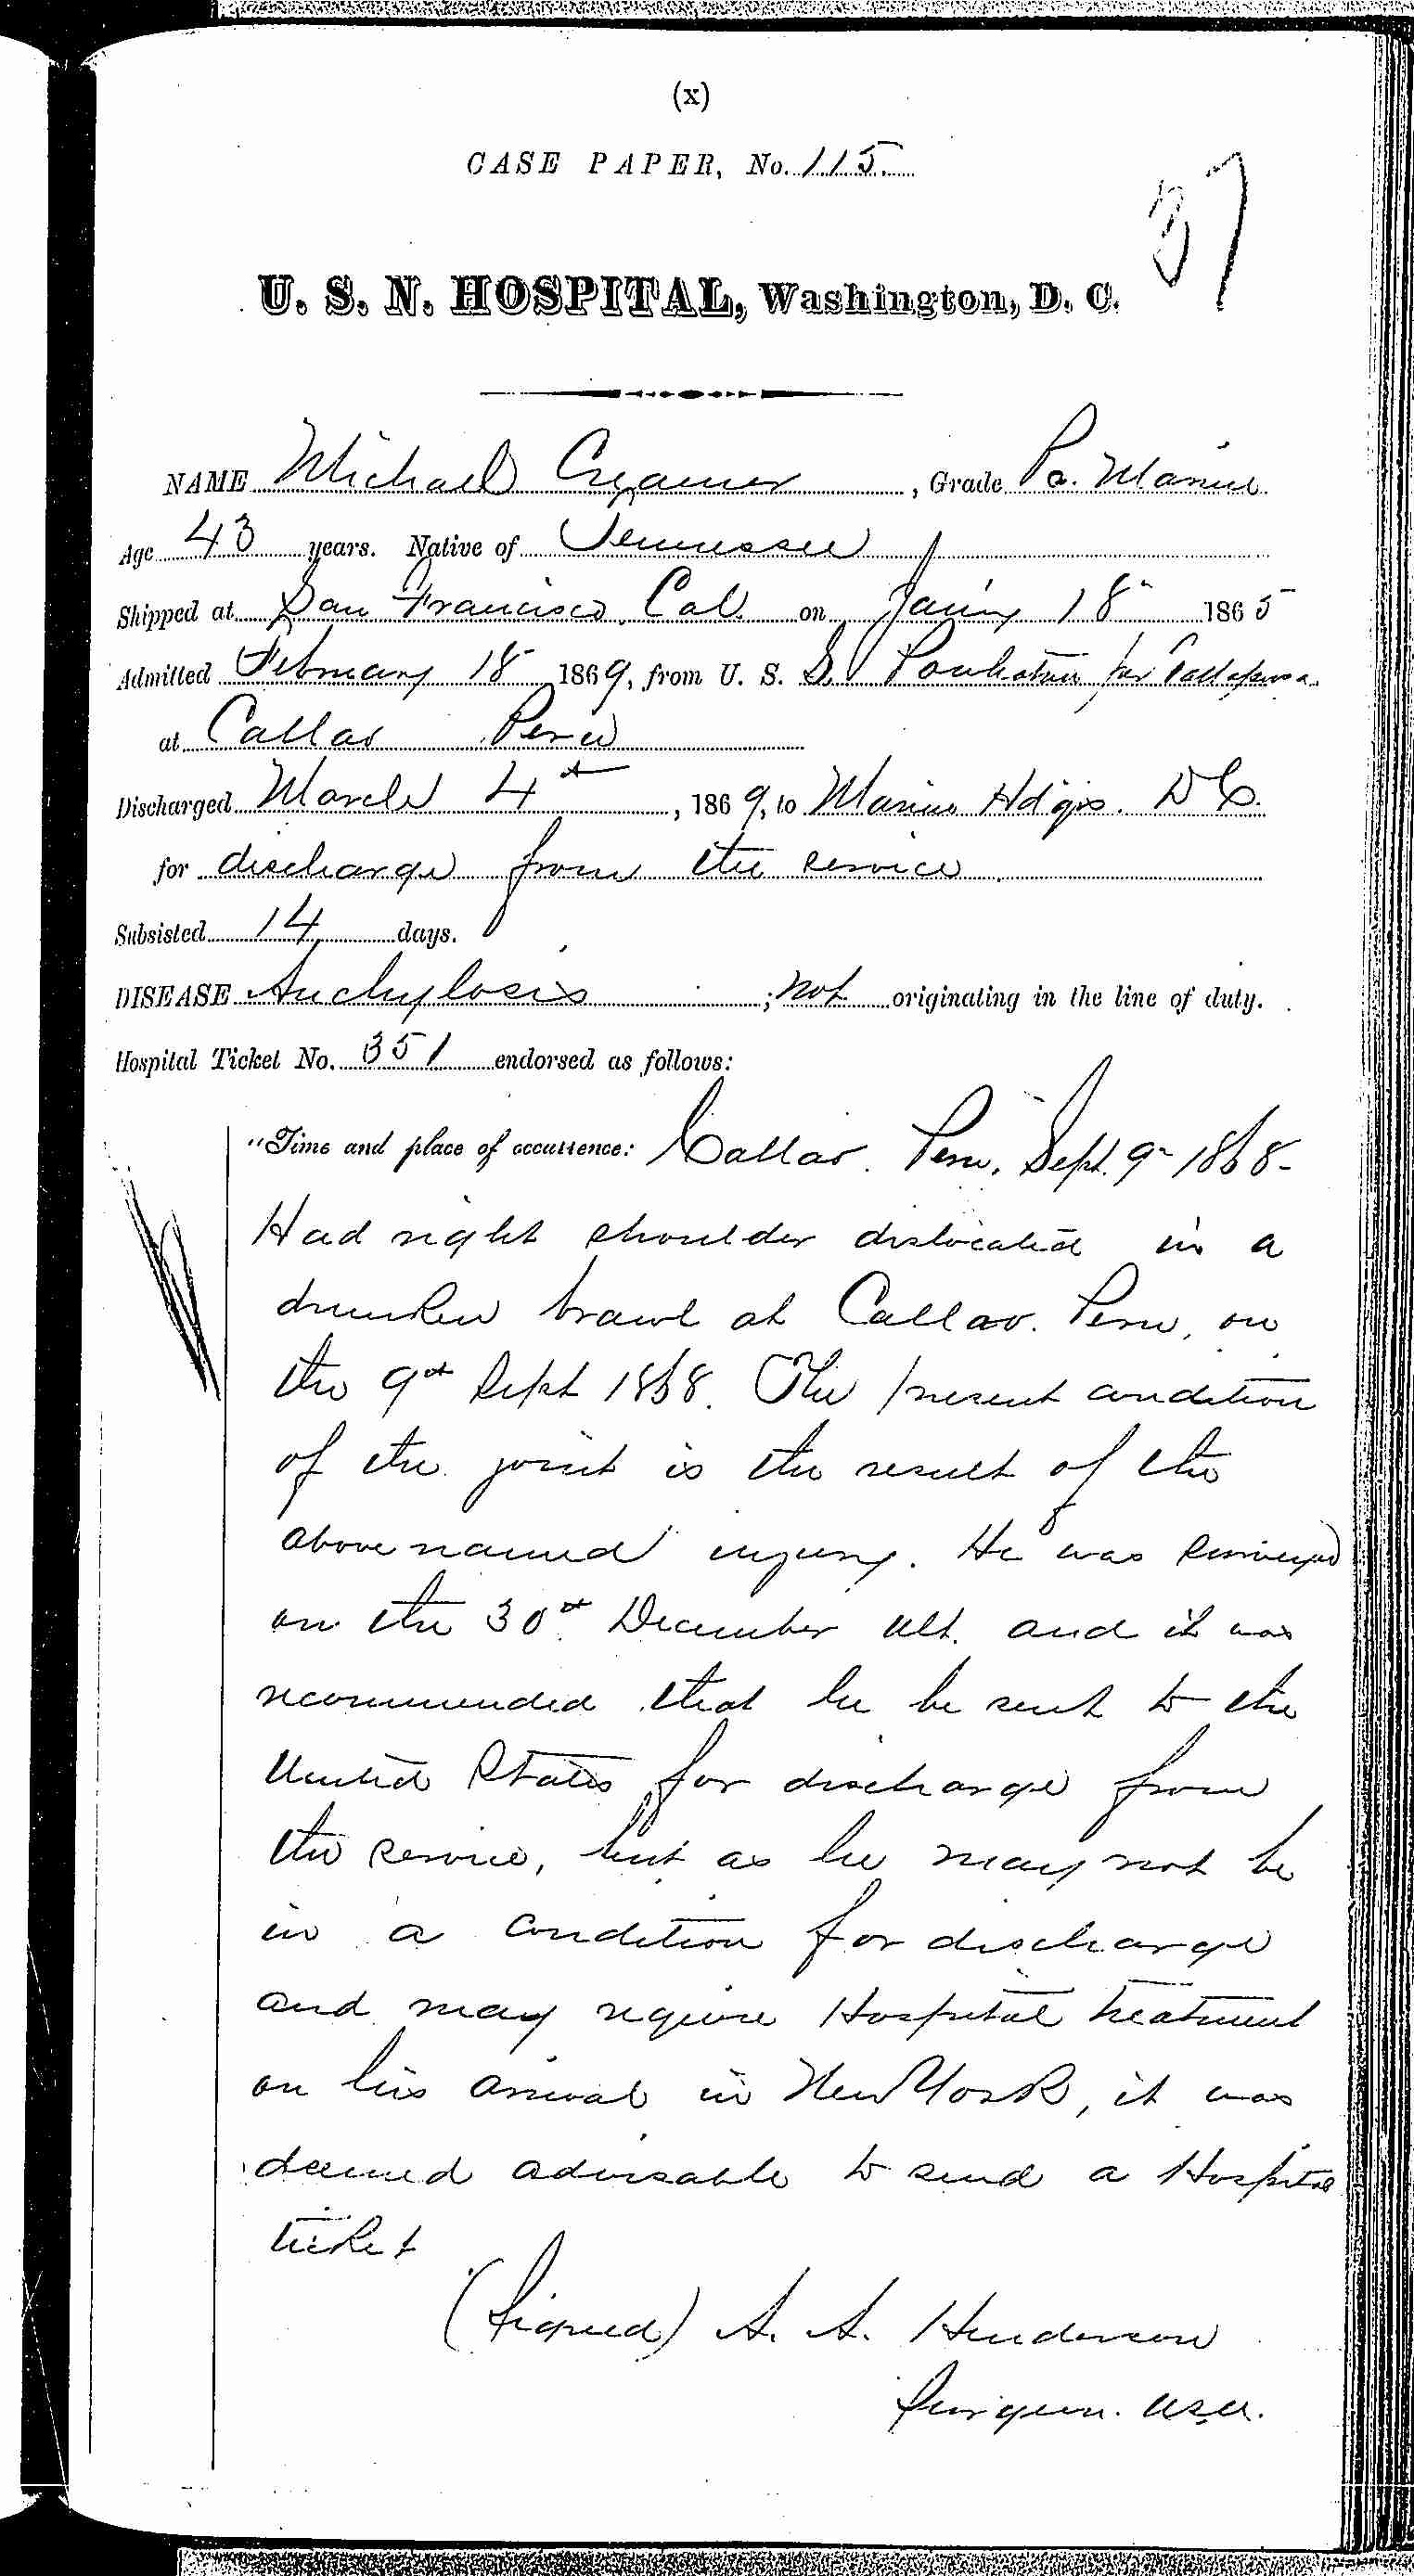 Entry for Michael Craemer (page 1 of 2) in the log Hospital Tickets and Case Papers - Naval Hospital - Washington, D.C. - 1868-69